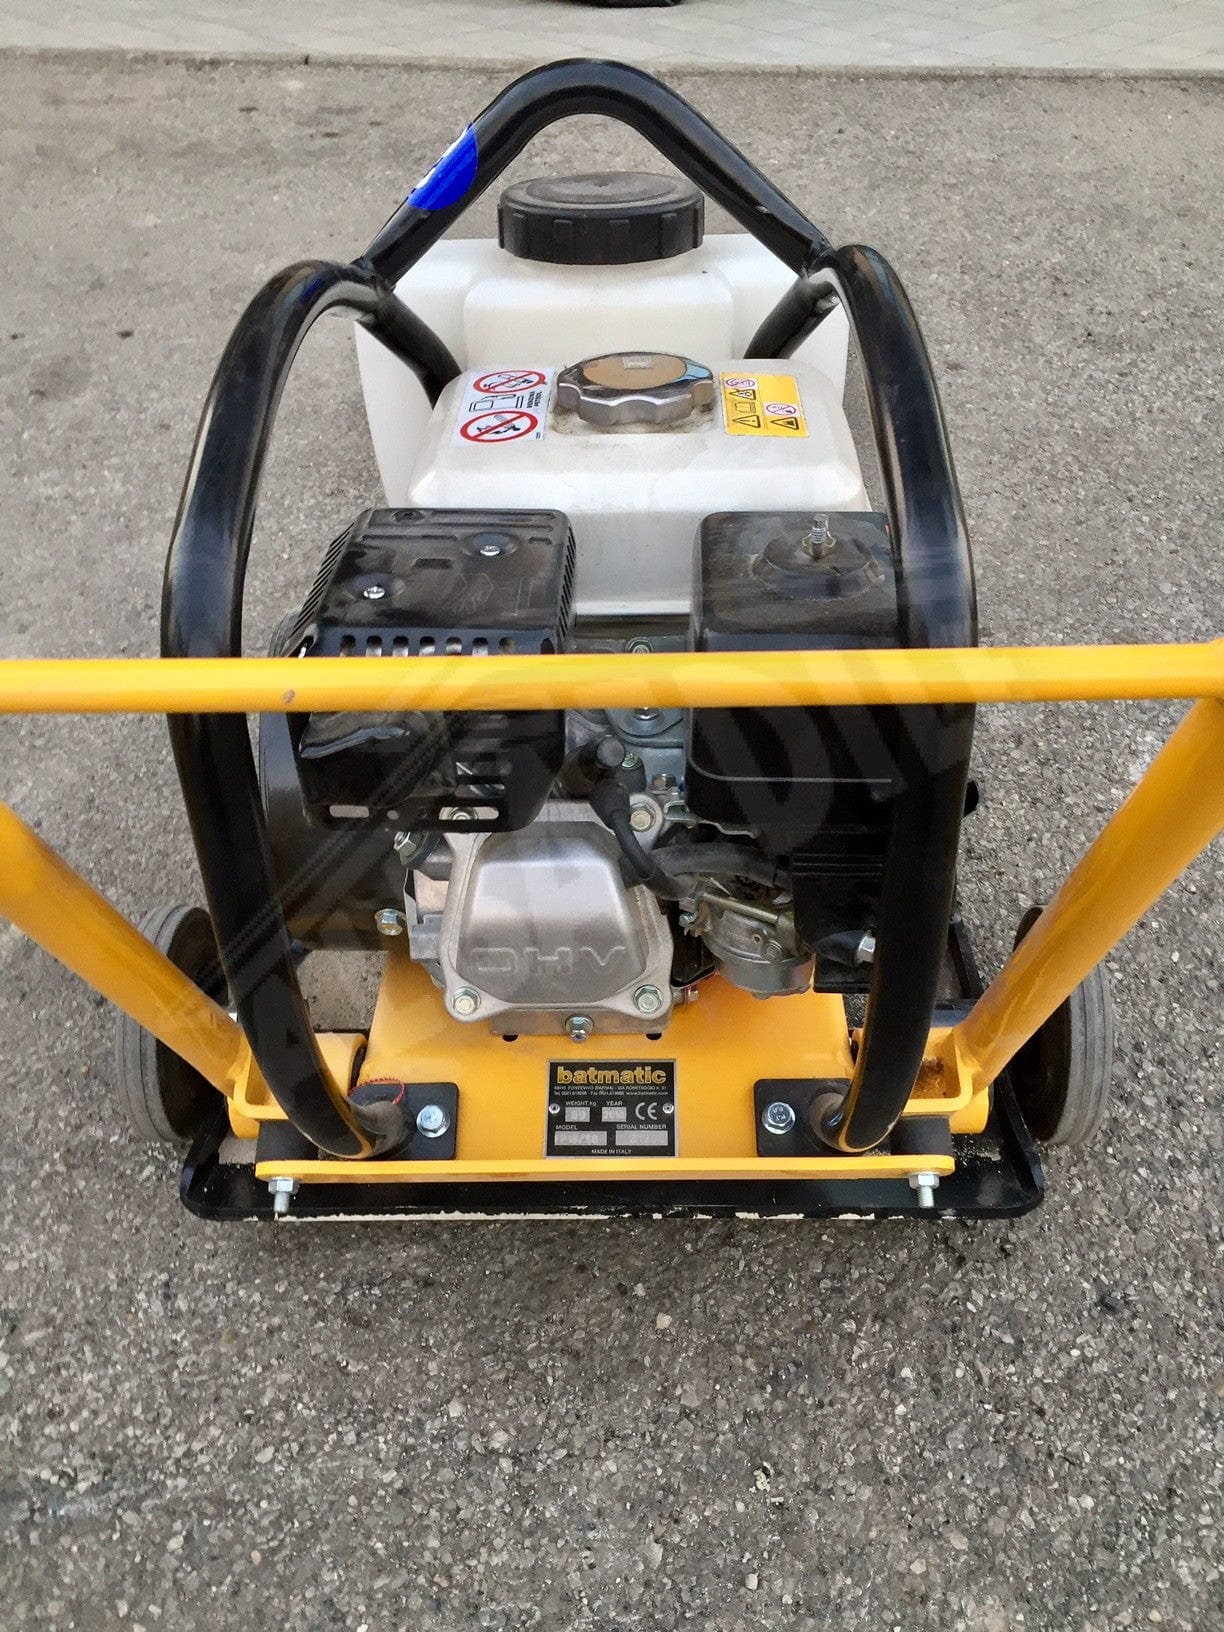 Batmatic 90Kg Diesel Compactor 3.5 kW / 4.7 HP - FP 1650G | Supply Master | Accra, Ghana Construction Equipment Buy Tools hardware Building materials